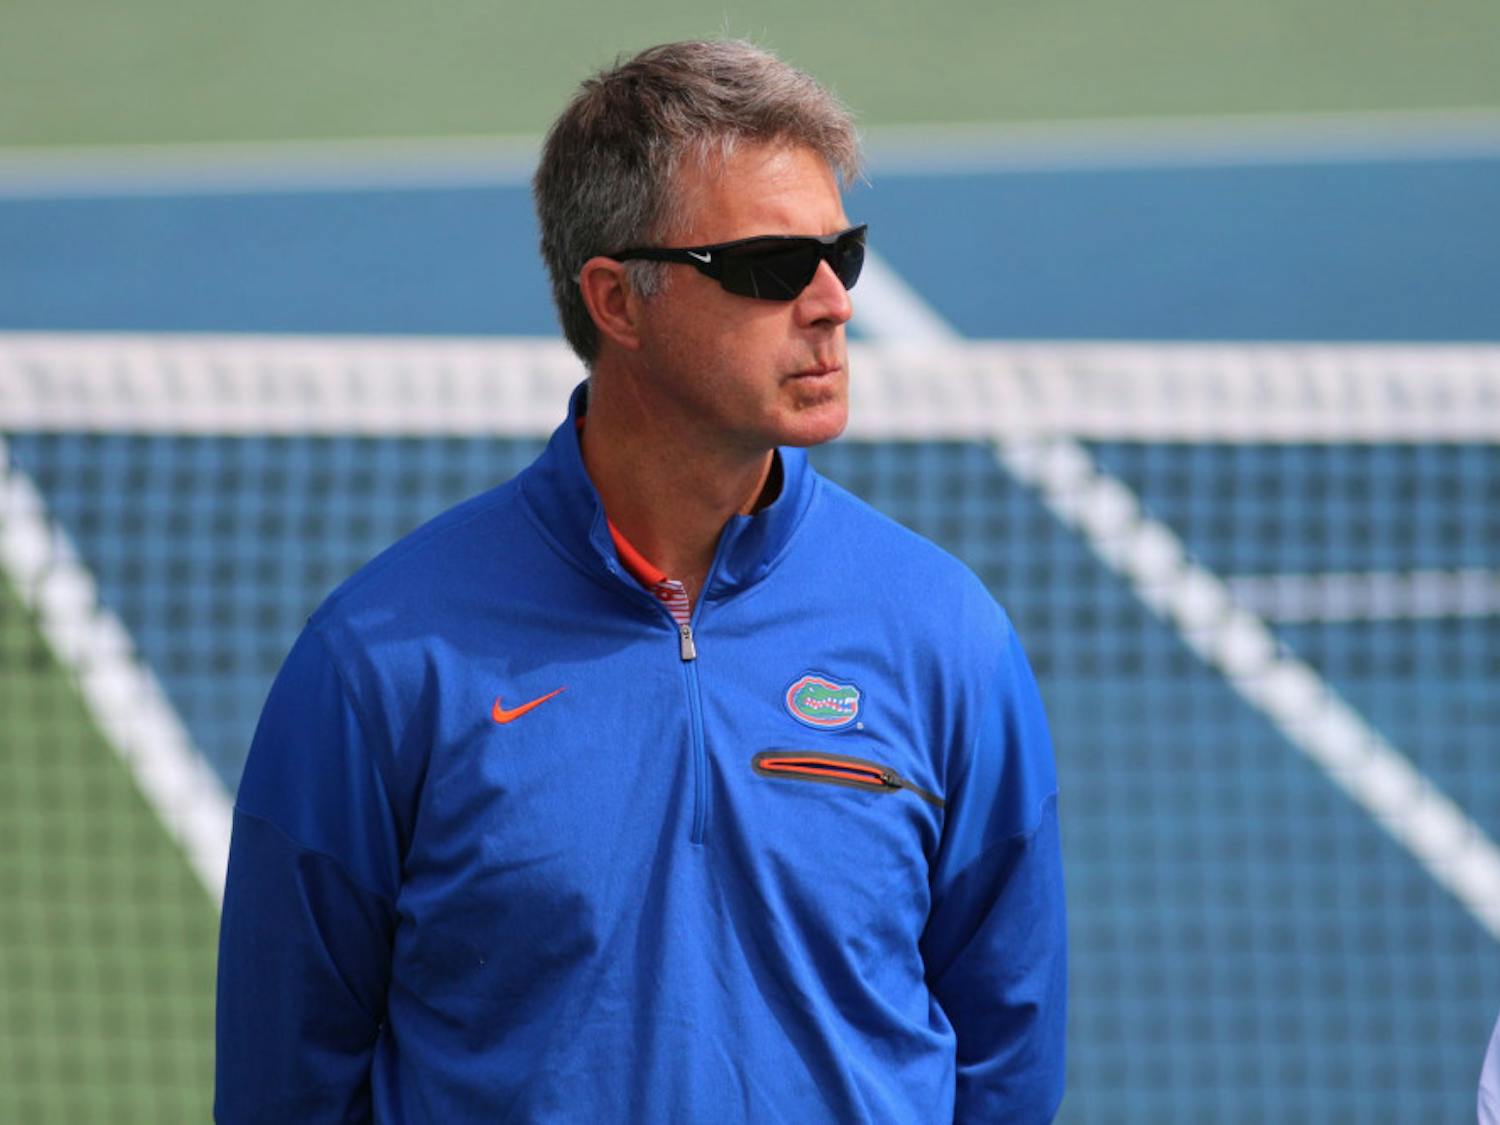 UF women's tennis coach Roland Thornqvist said his team is still growing collectively. "Experiences like these are truly invaluable for a group as young as ours," he said.
&nbsp;